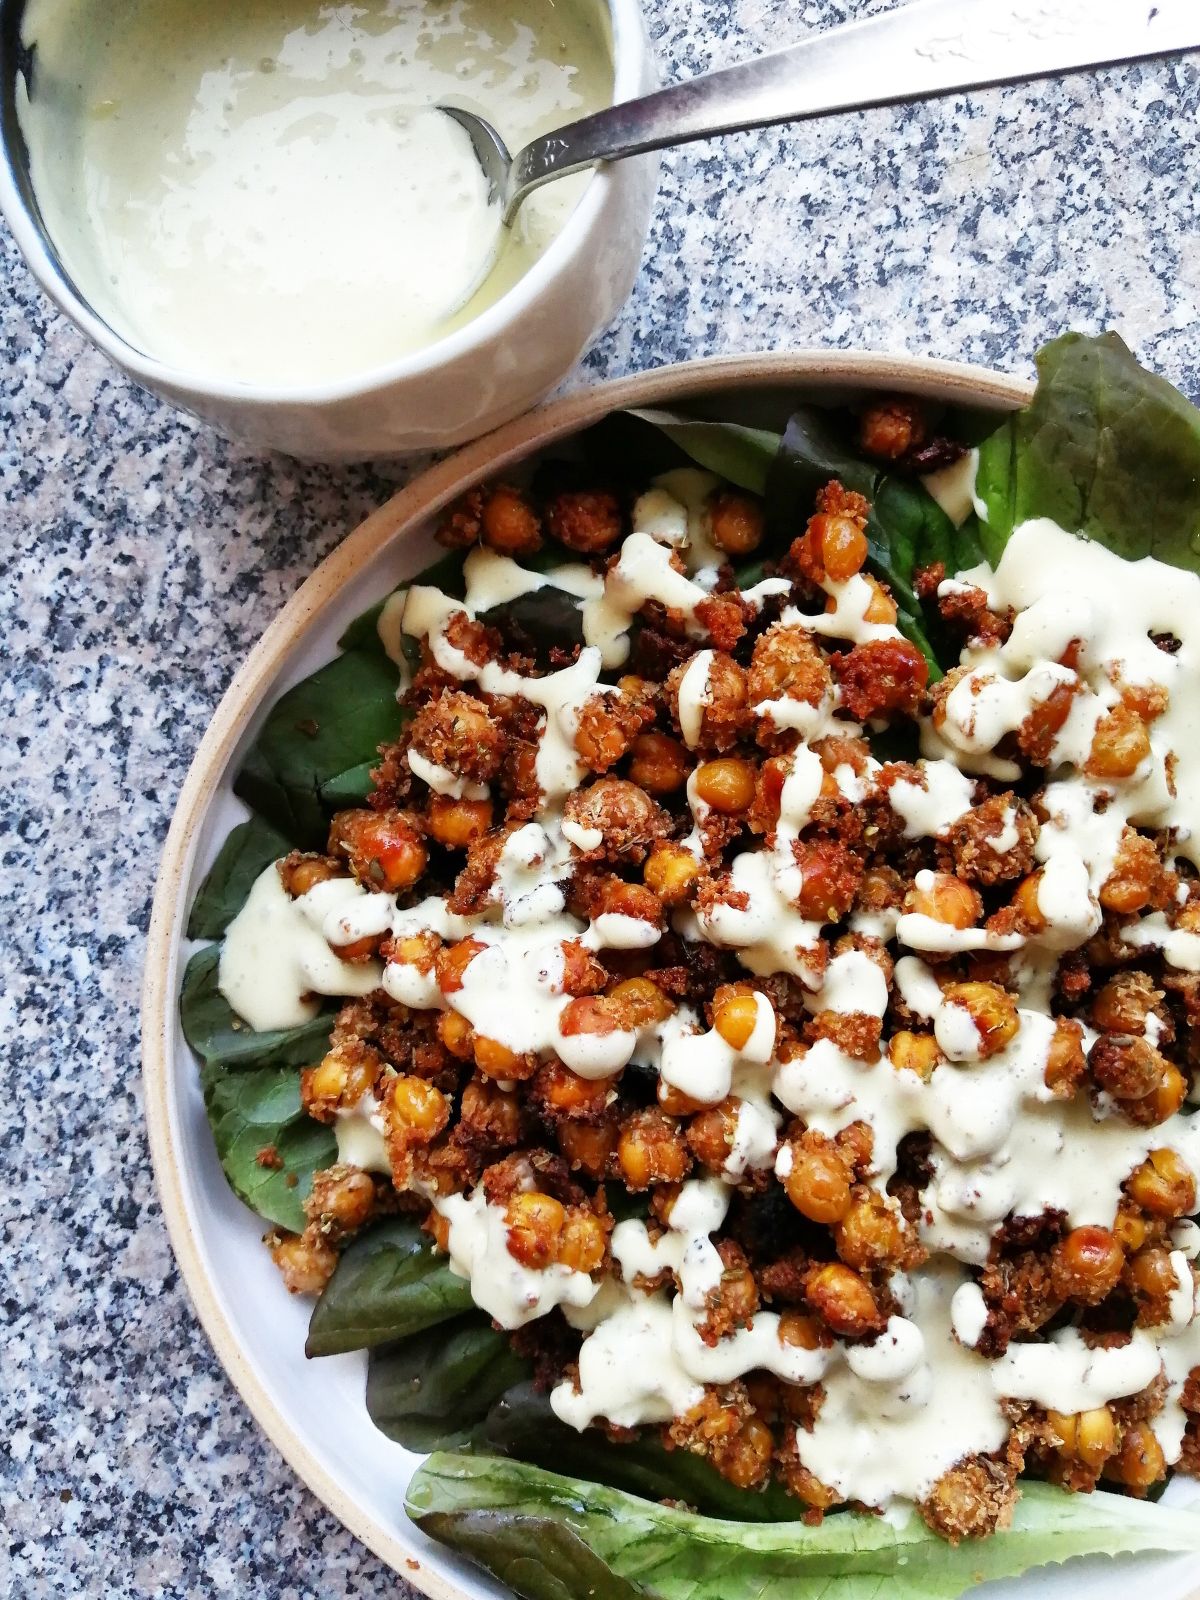 creamy vegan cashew dressing recipe perfect for salads and roasted veggies and dips